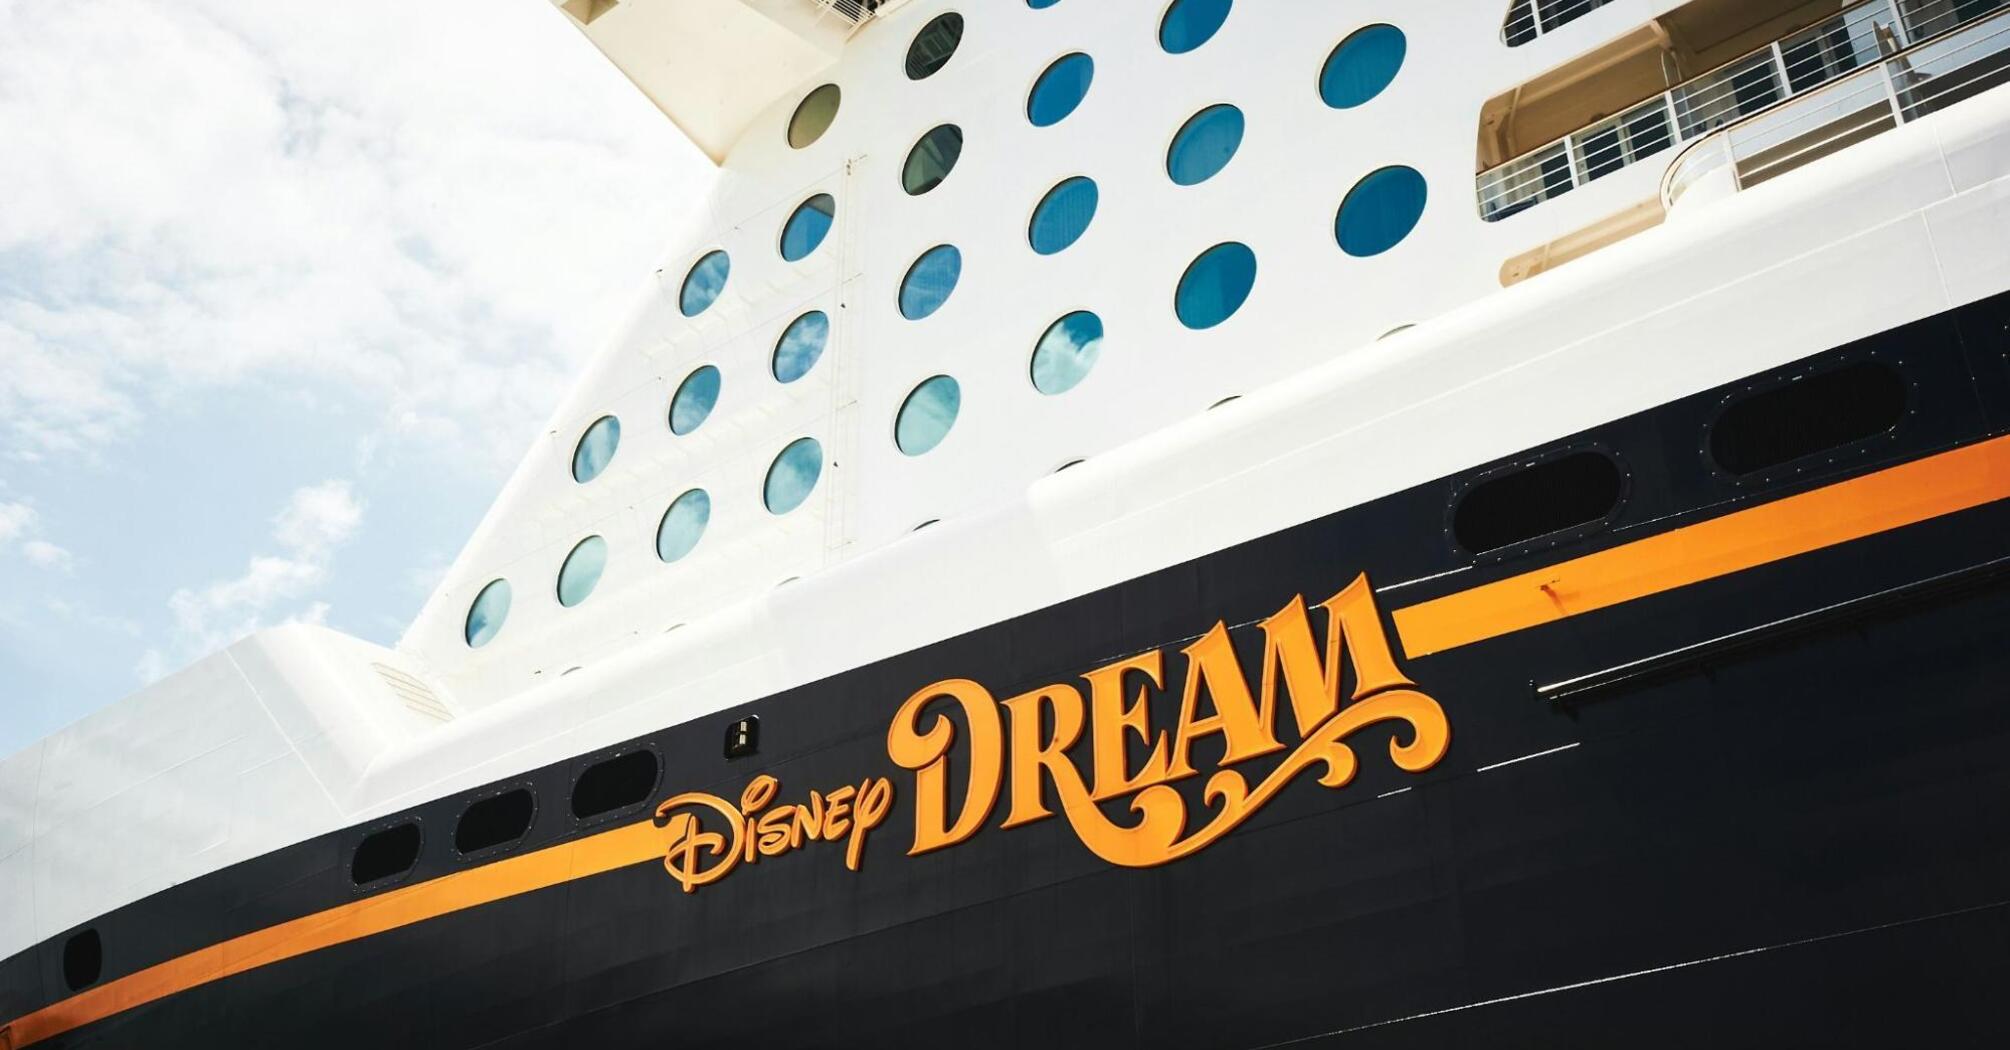 Details of the Disney cruise liner